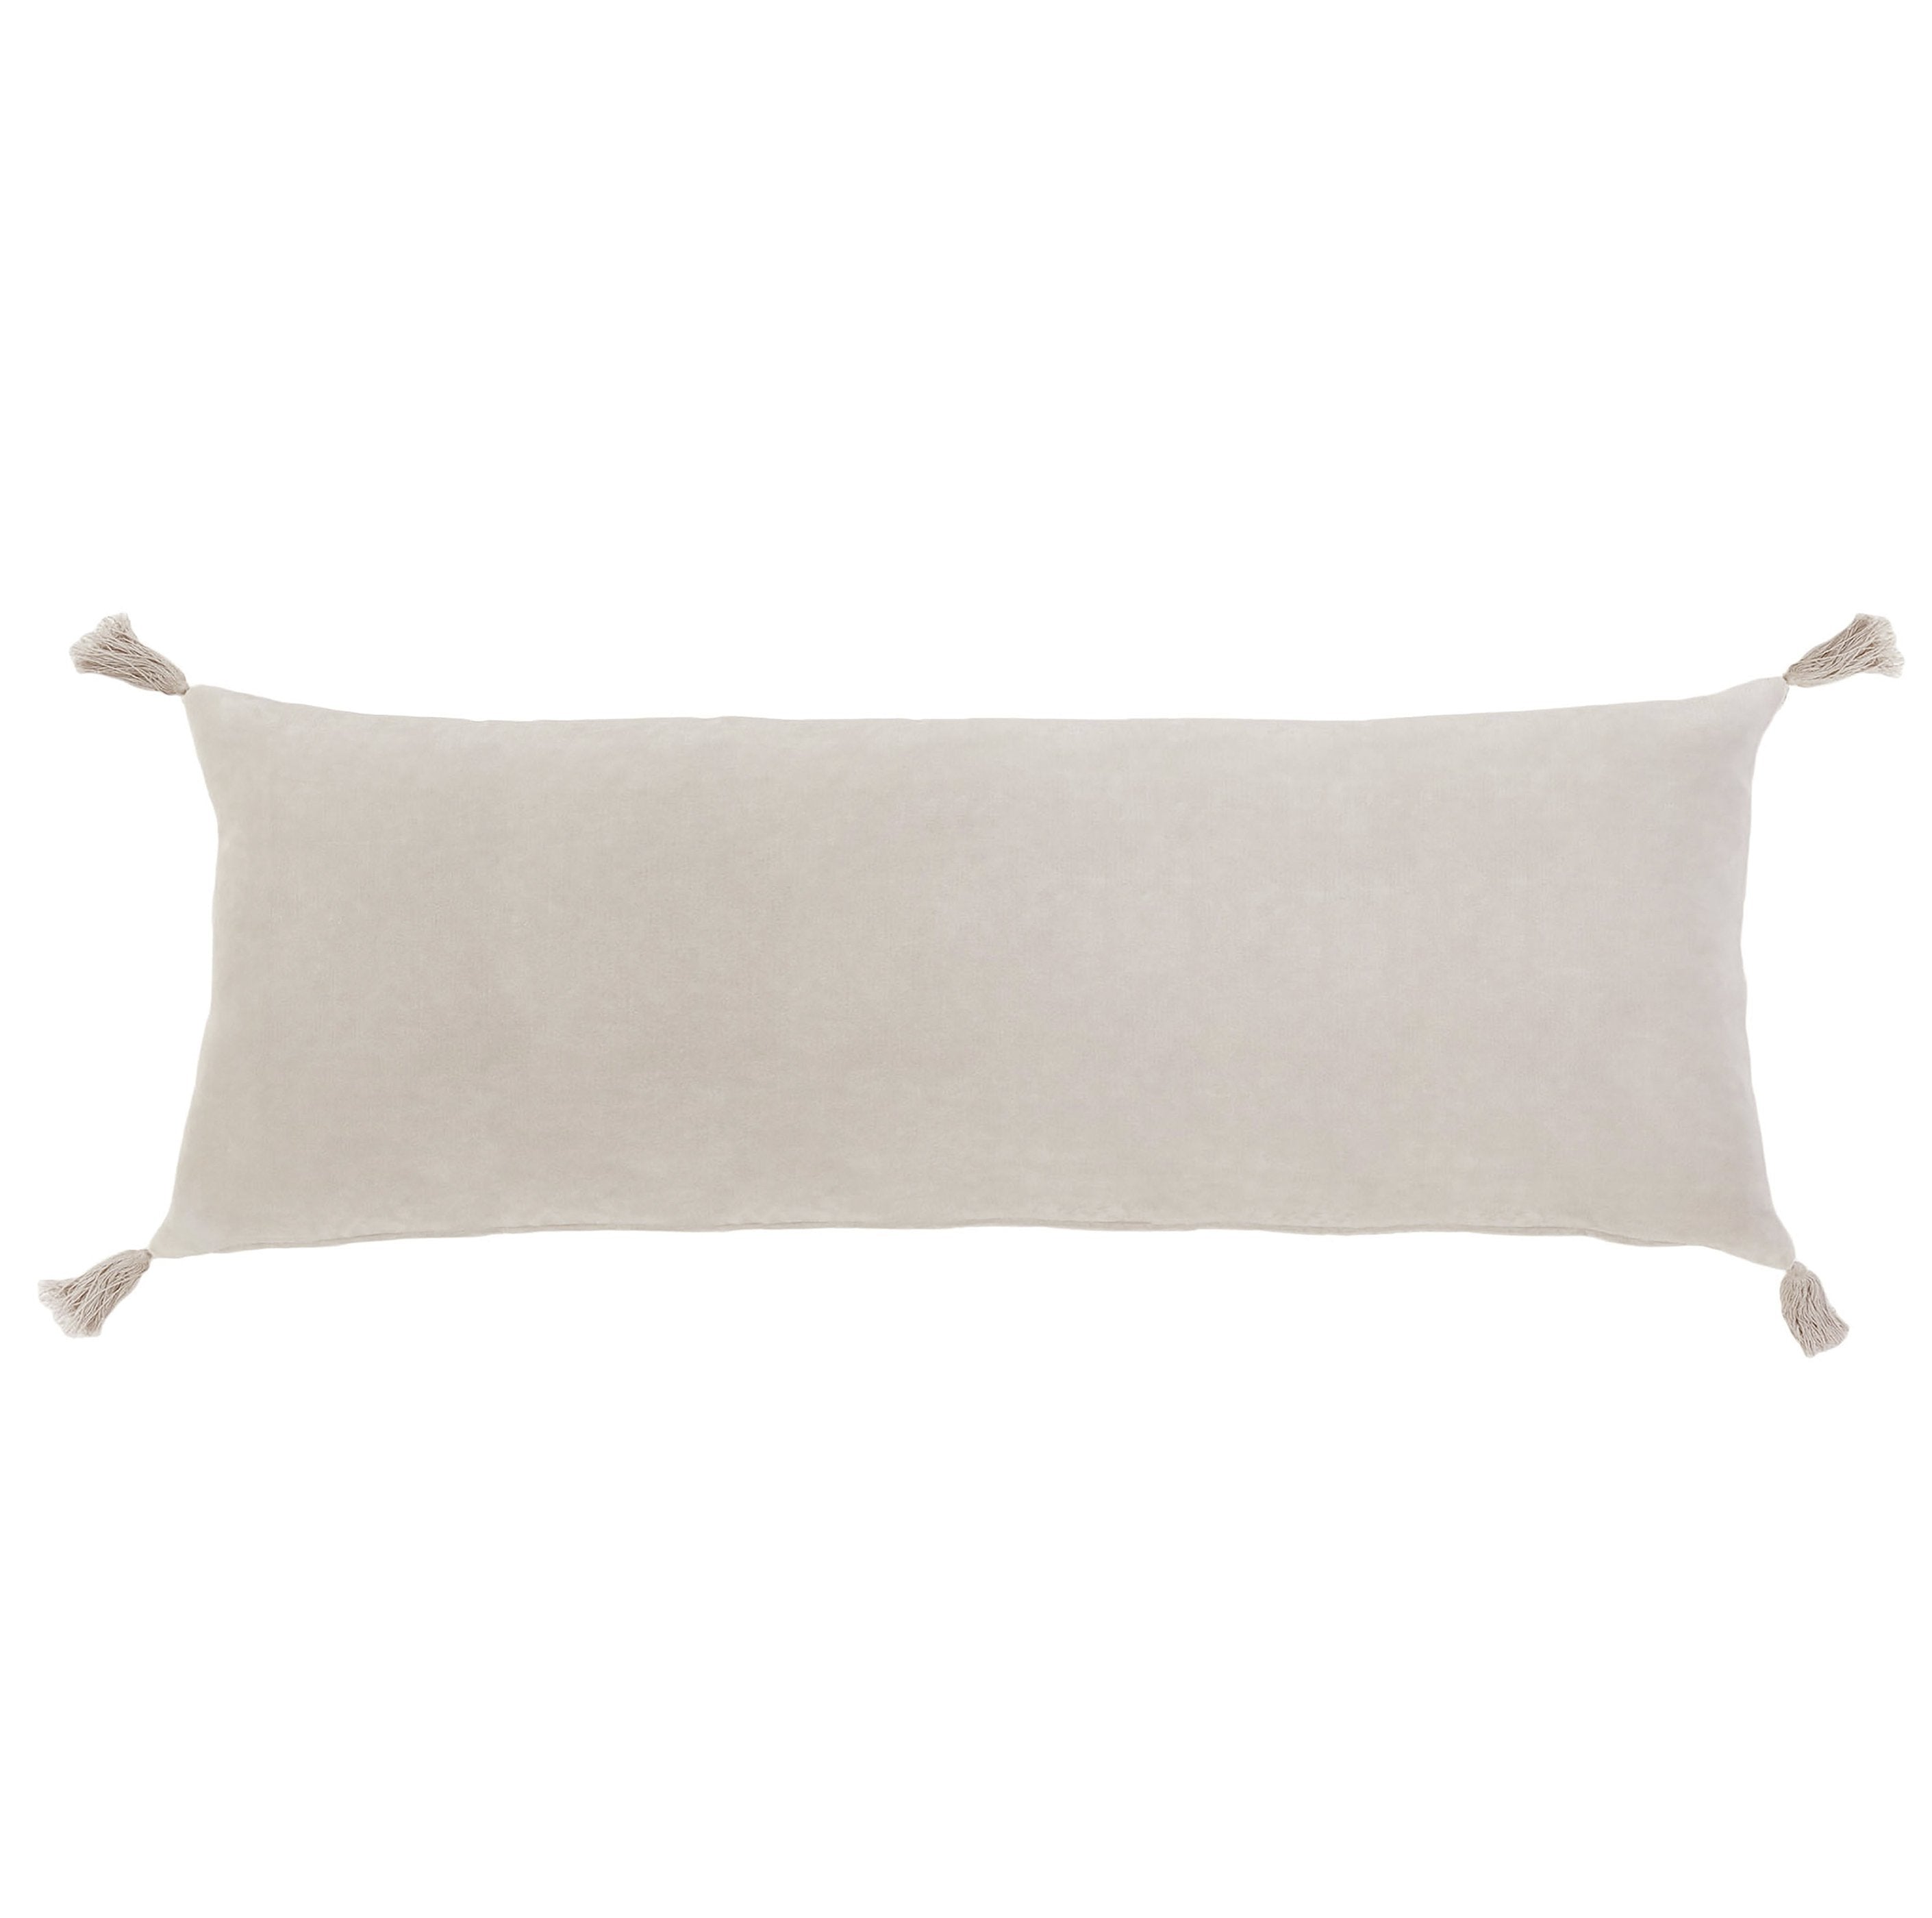 Bianca 14"x40" Pillow with Insert - 4 Colors-Pom Pom at Home